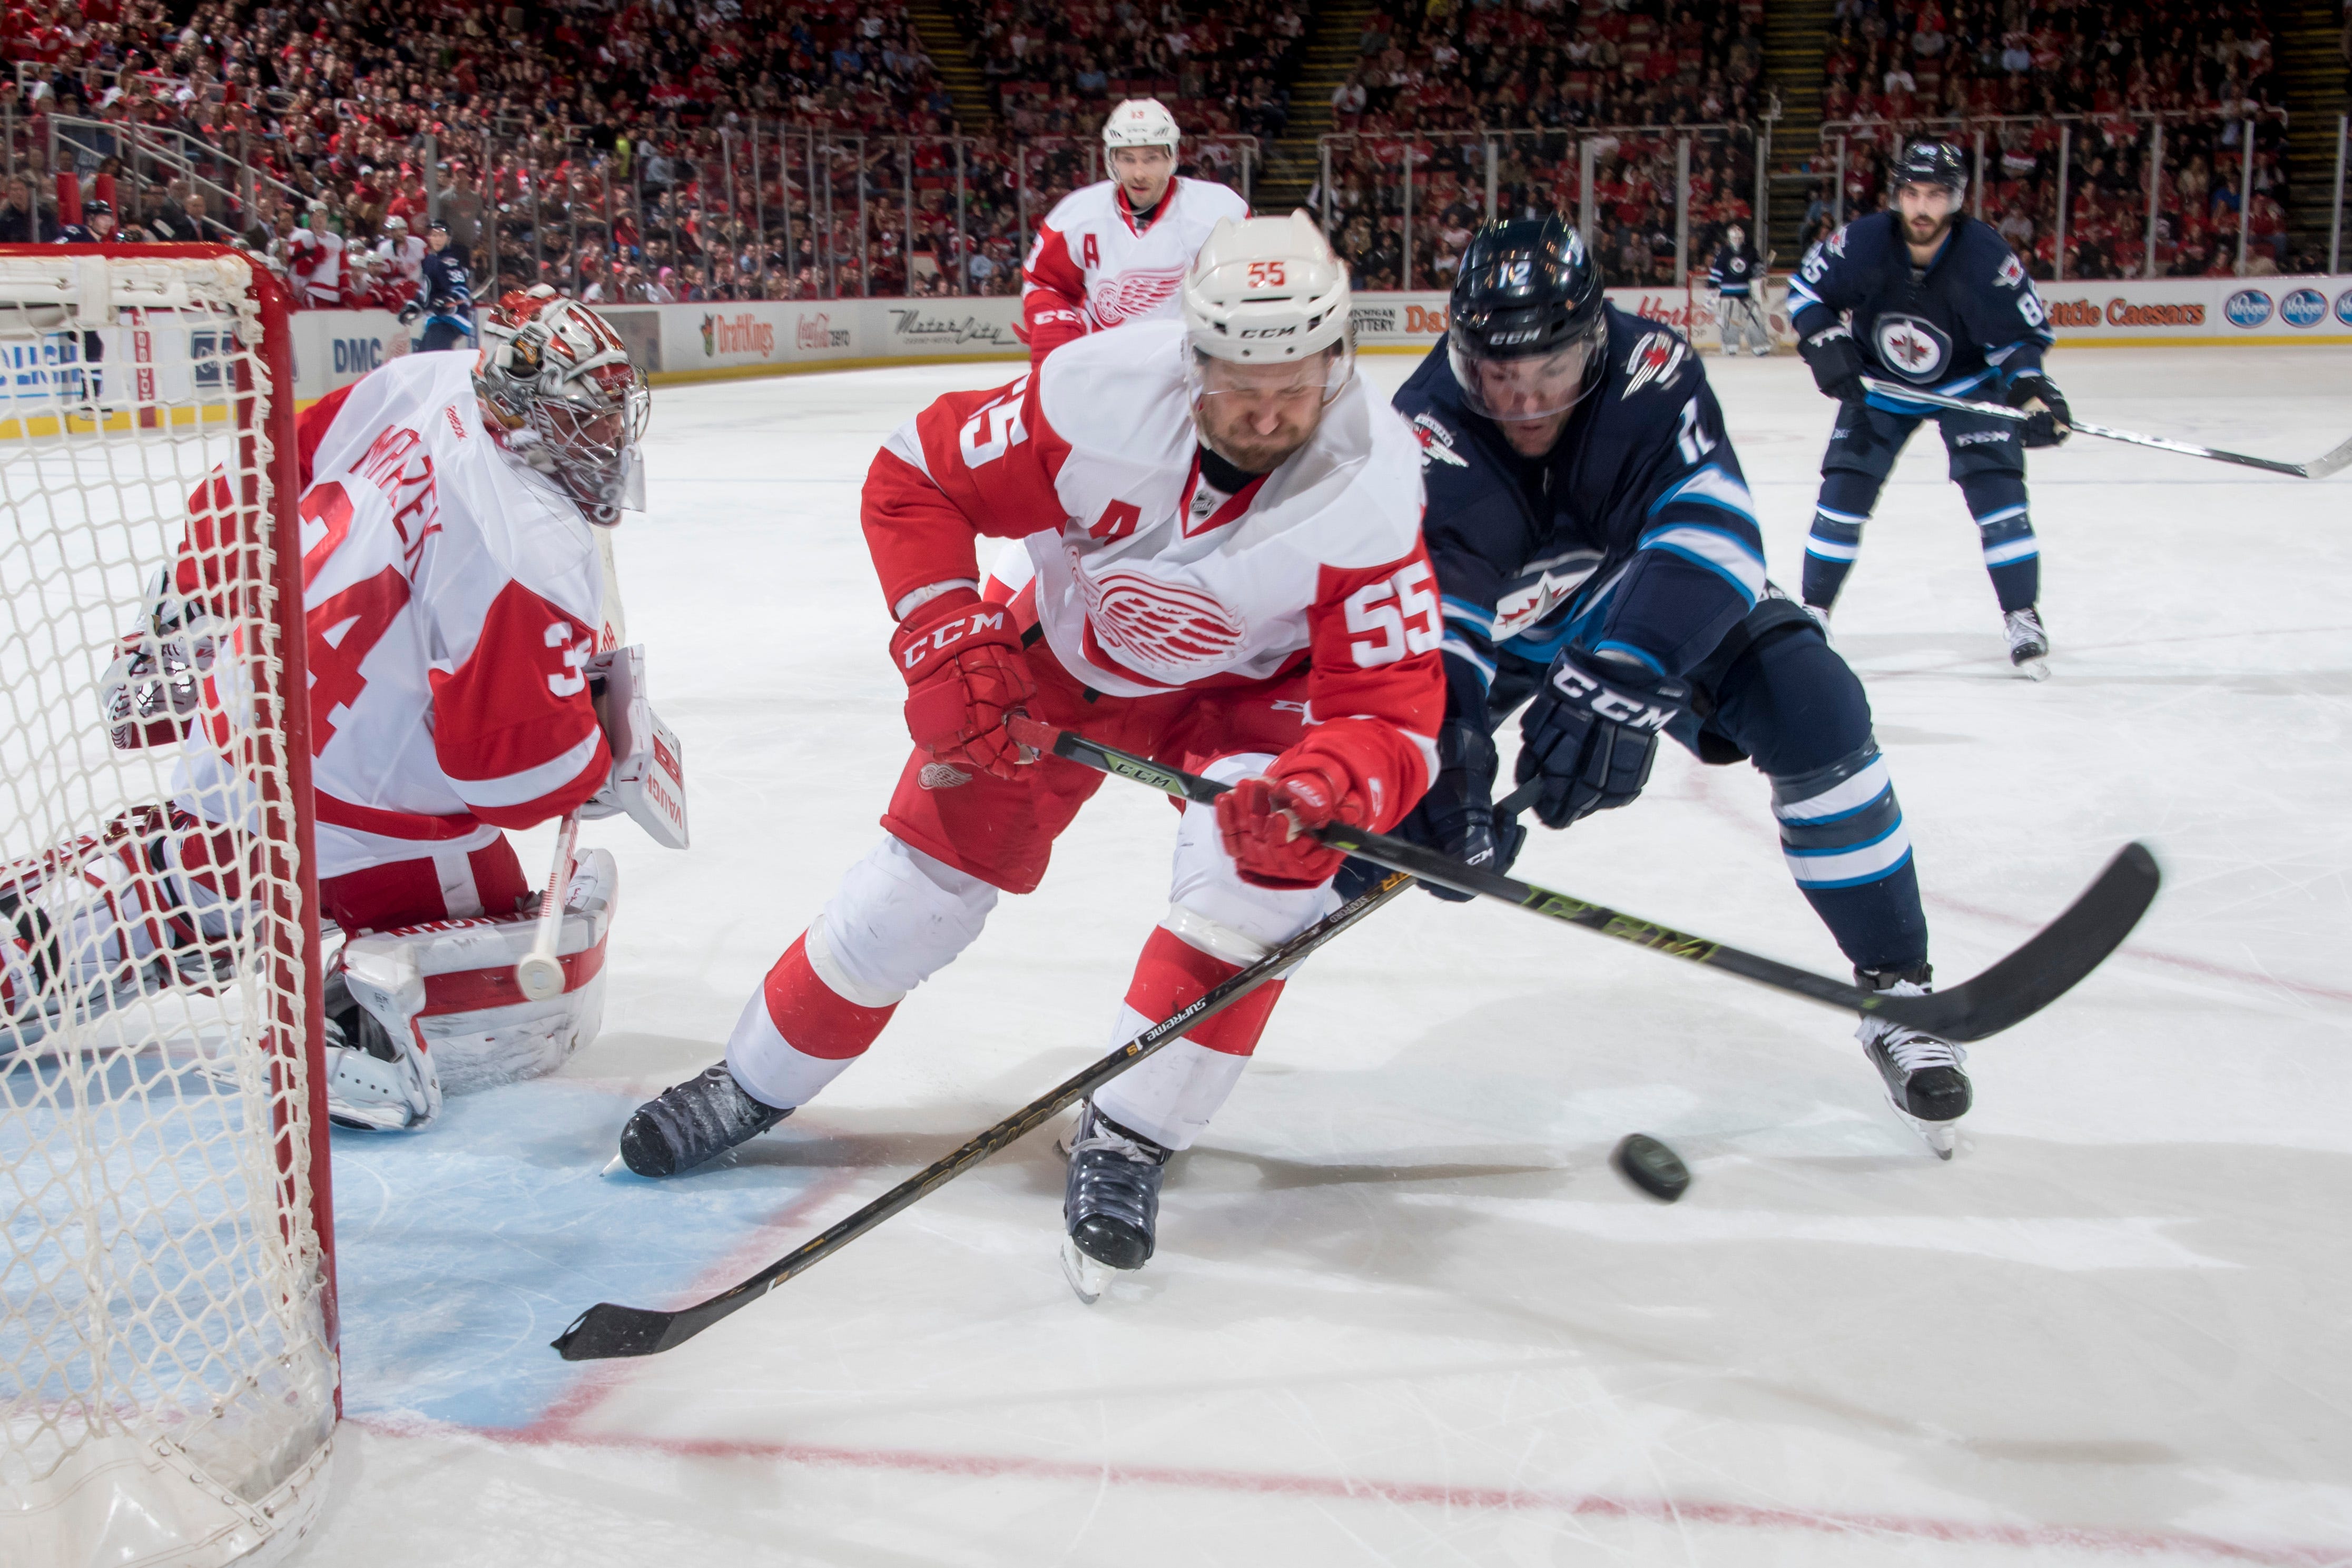 Detroit defenseman Niklas Kronwall and Winnipeg right wing Drew Stafford battle for the puck in front of Detroit goalie Petr Mrazek during a game at Joe Louis Arena on March 10, 2016.